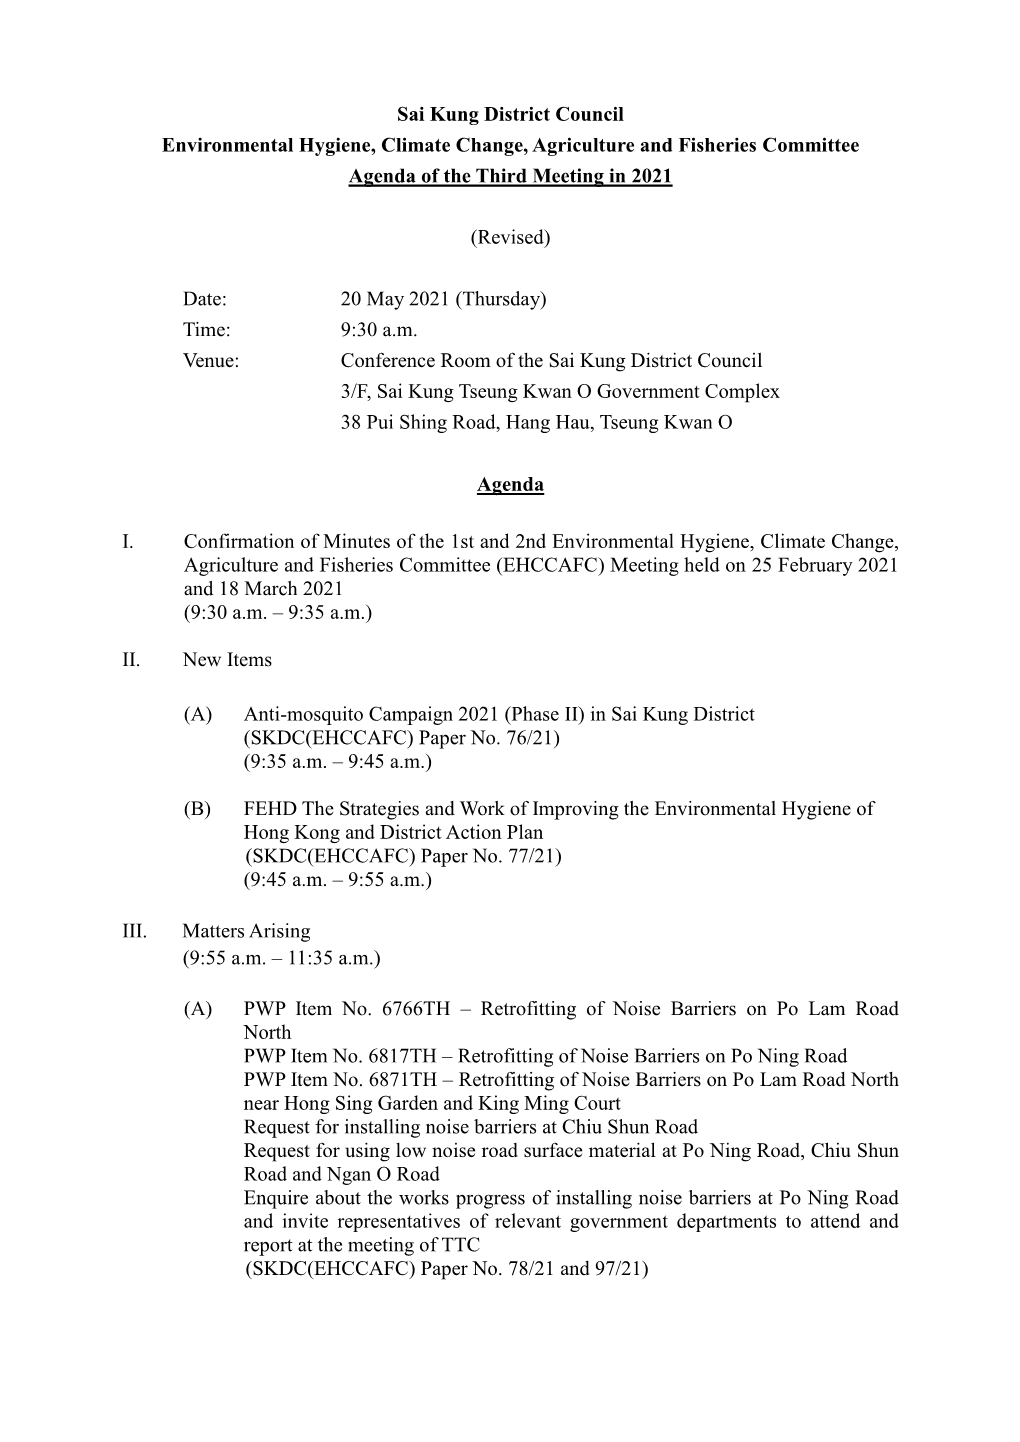 Sai Kung District Council Environmental Hygiene, Climate Change, Agriculture and Fisheries Committee Agenda of the Third Meeting in 2021